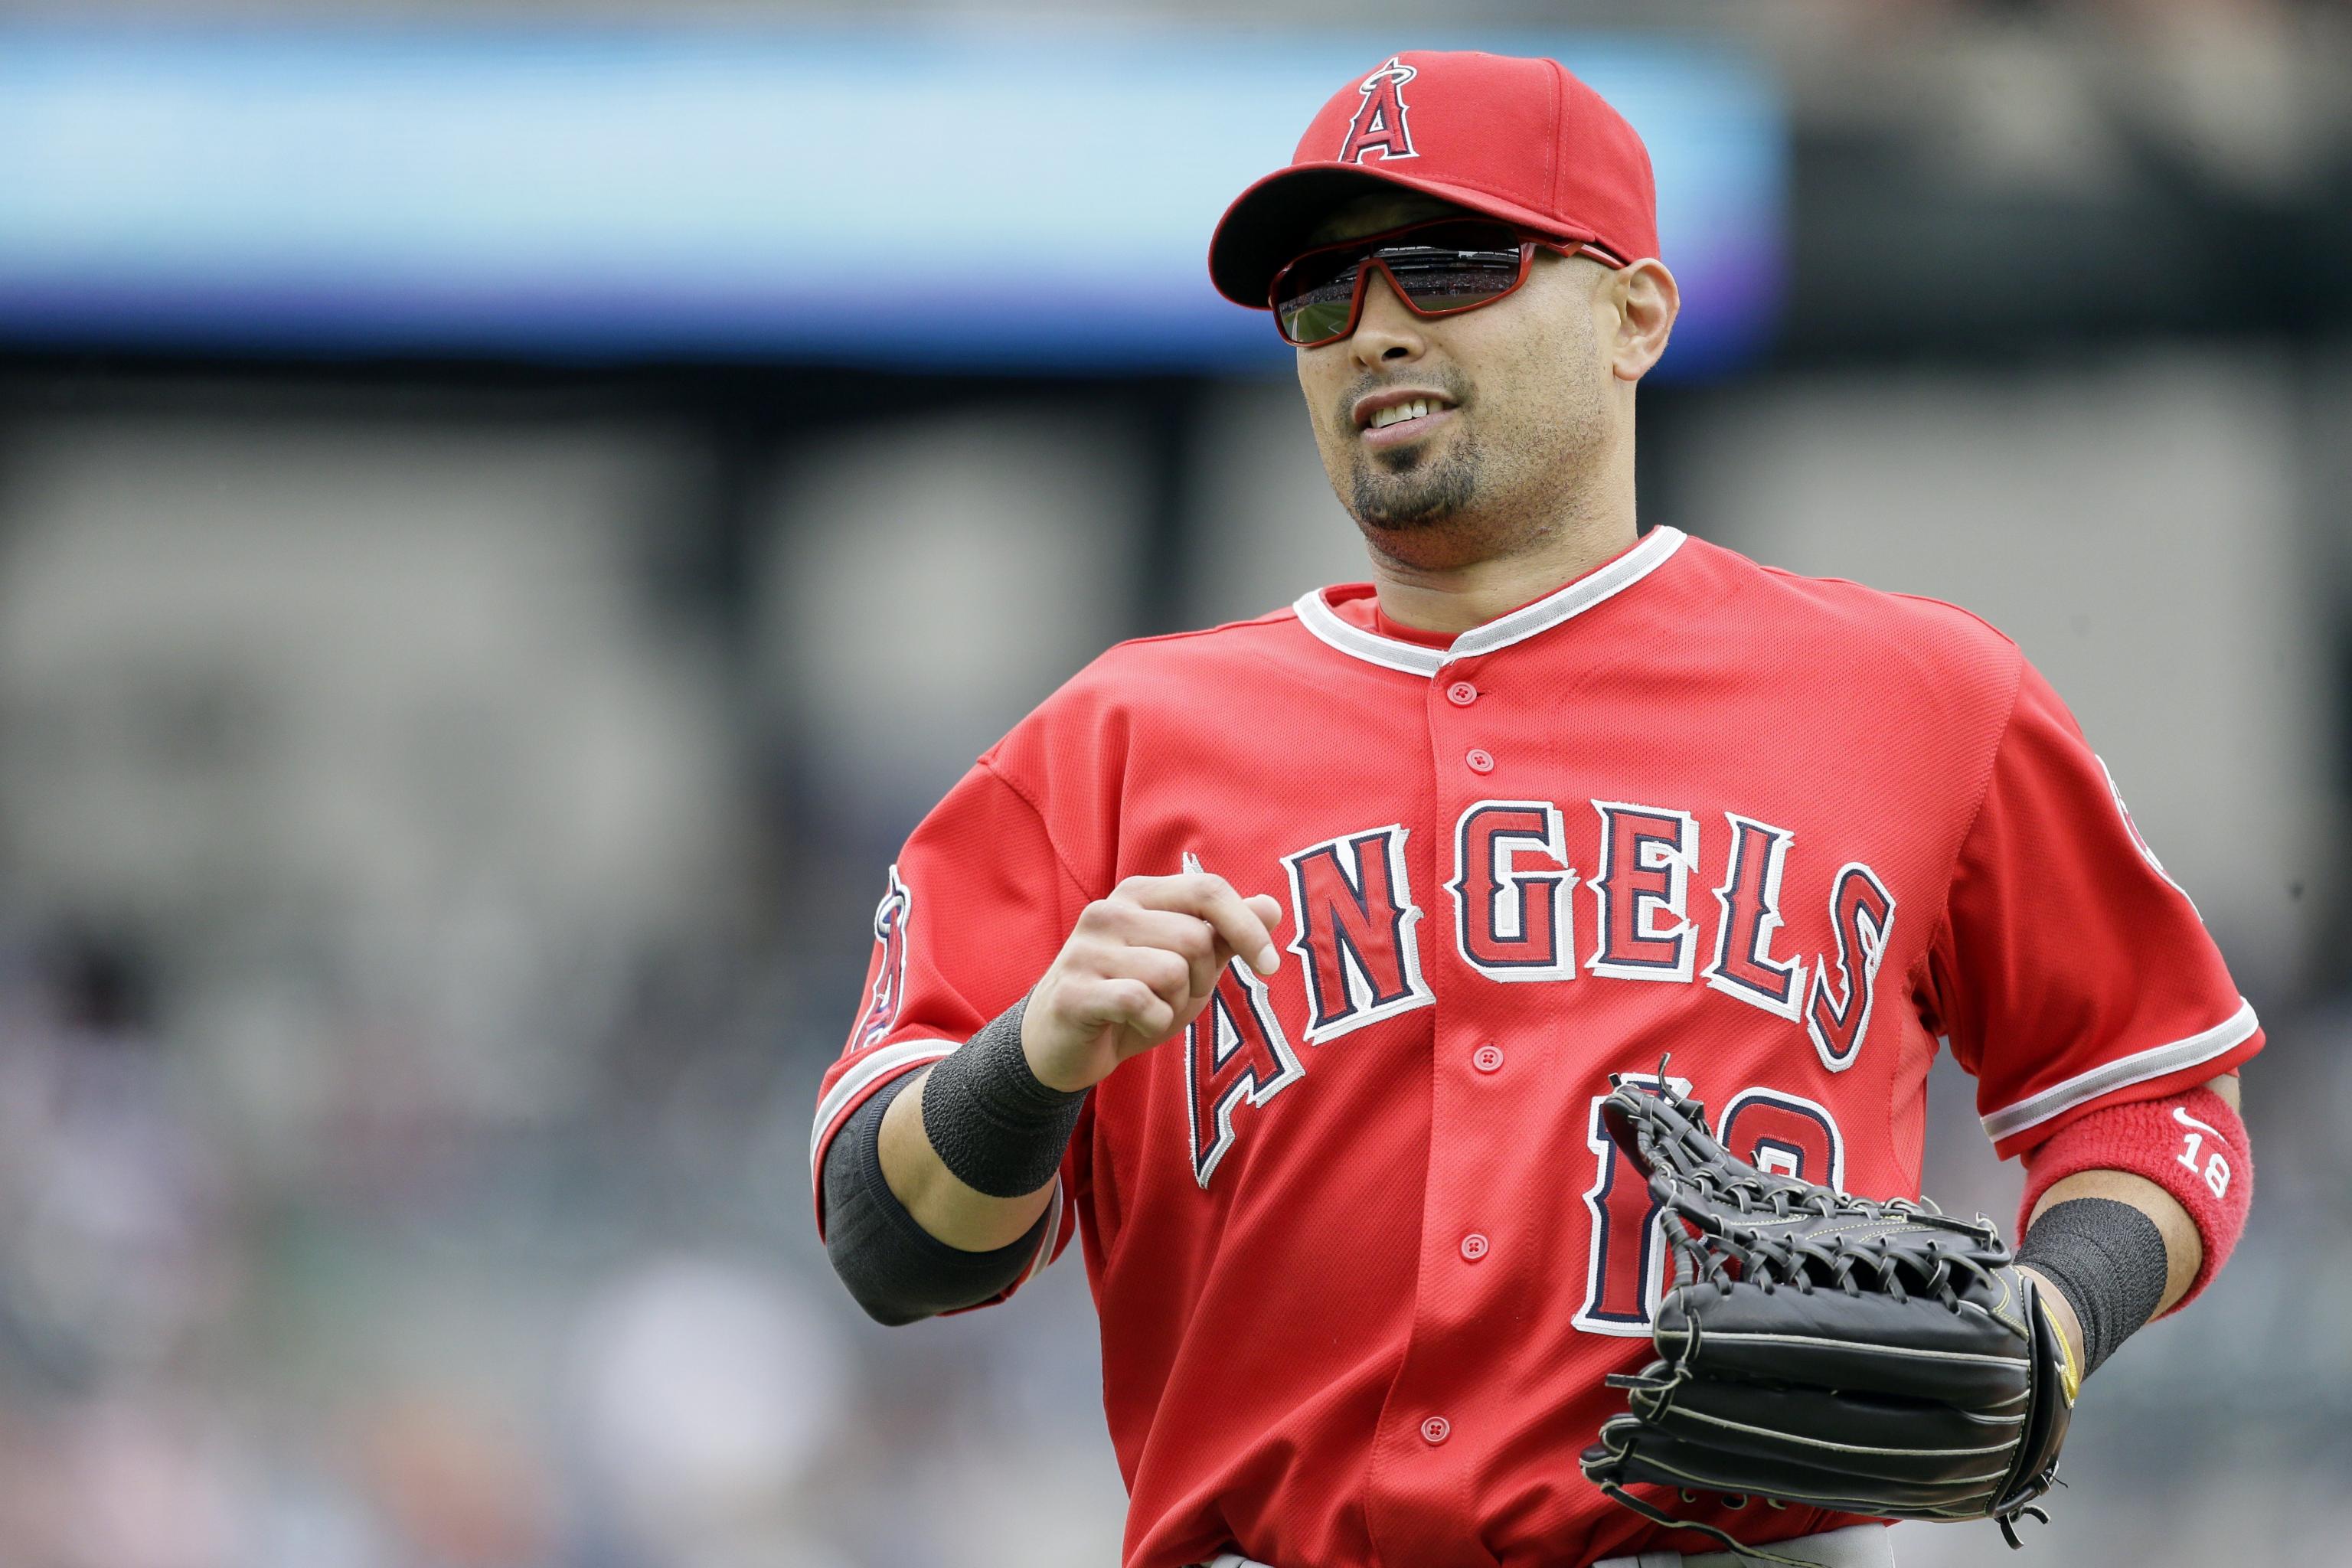 Shane Victorino: Latest News, Rumors and Speculation on Free Agent